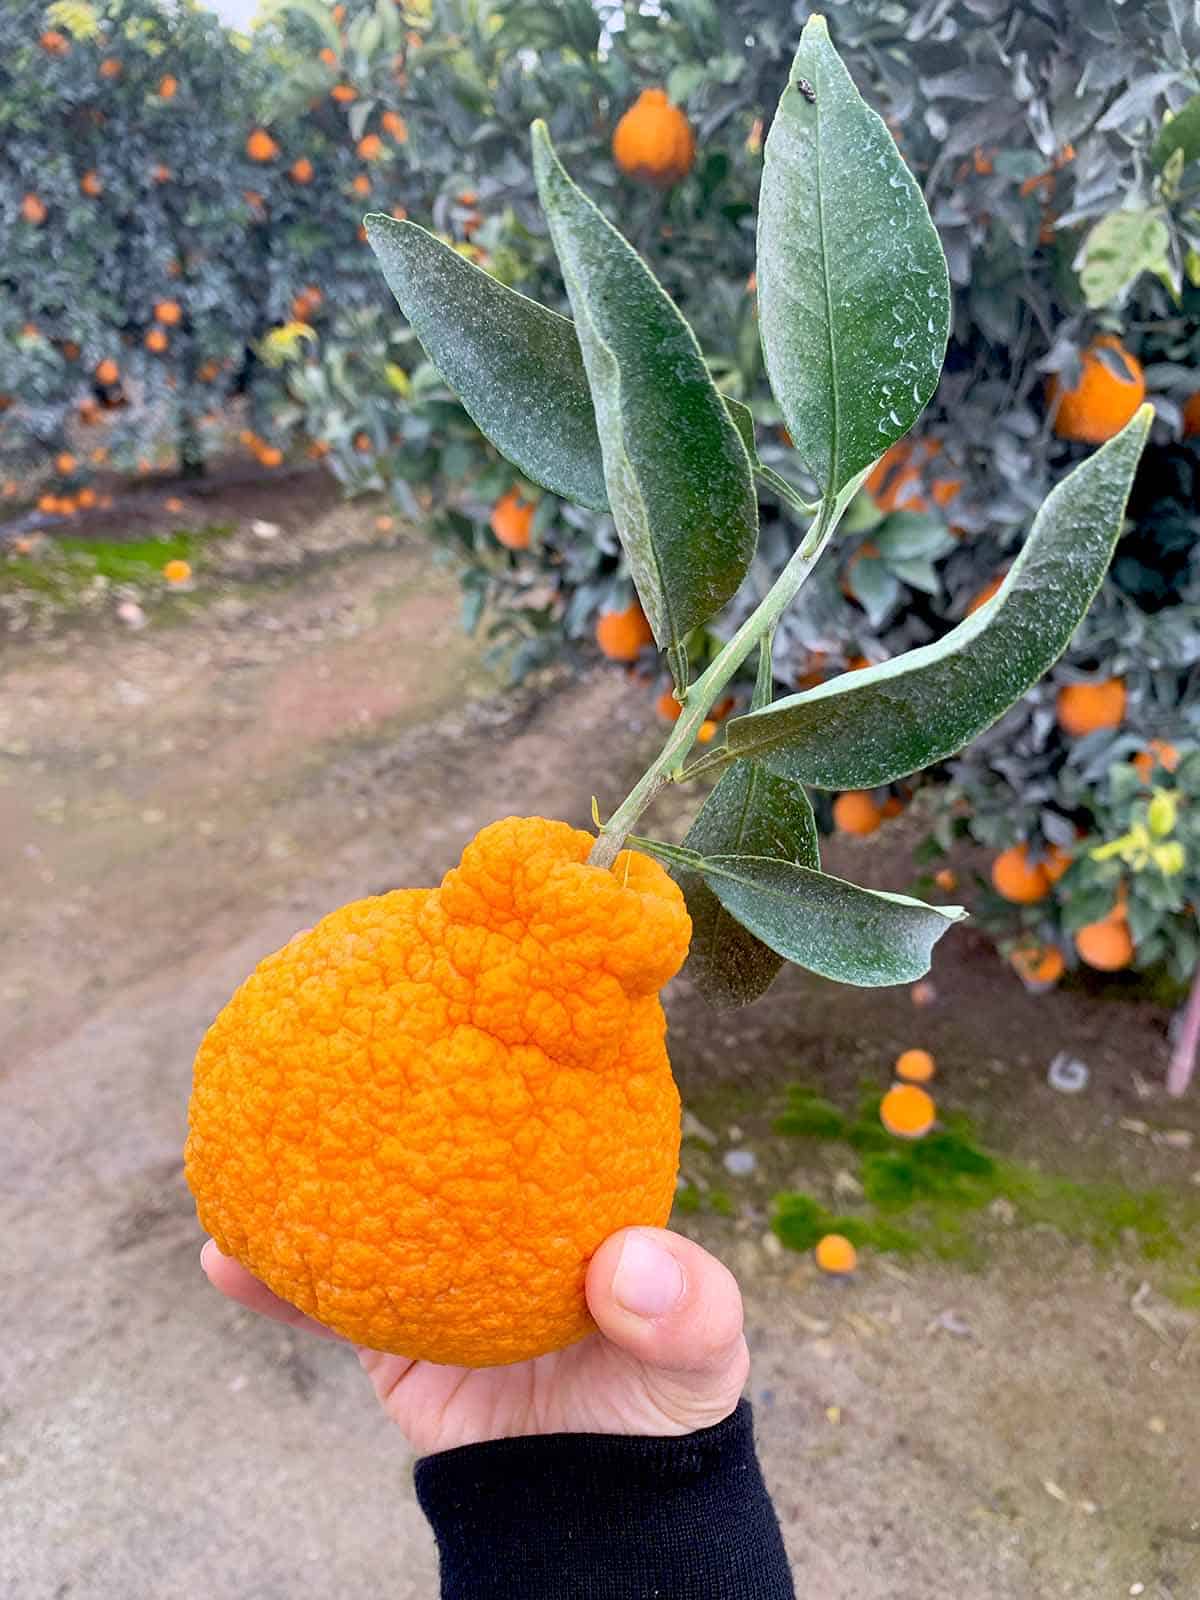 A hand holding a large orange citrus fruit with a stem and leaves on it over dirt